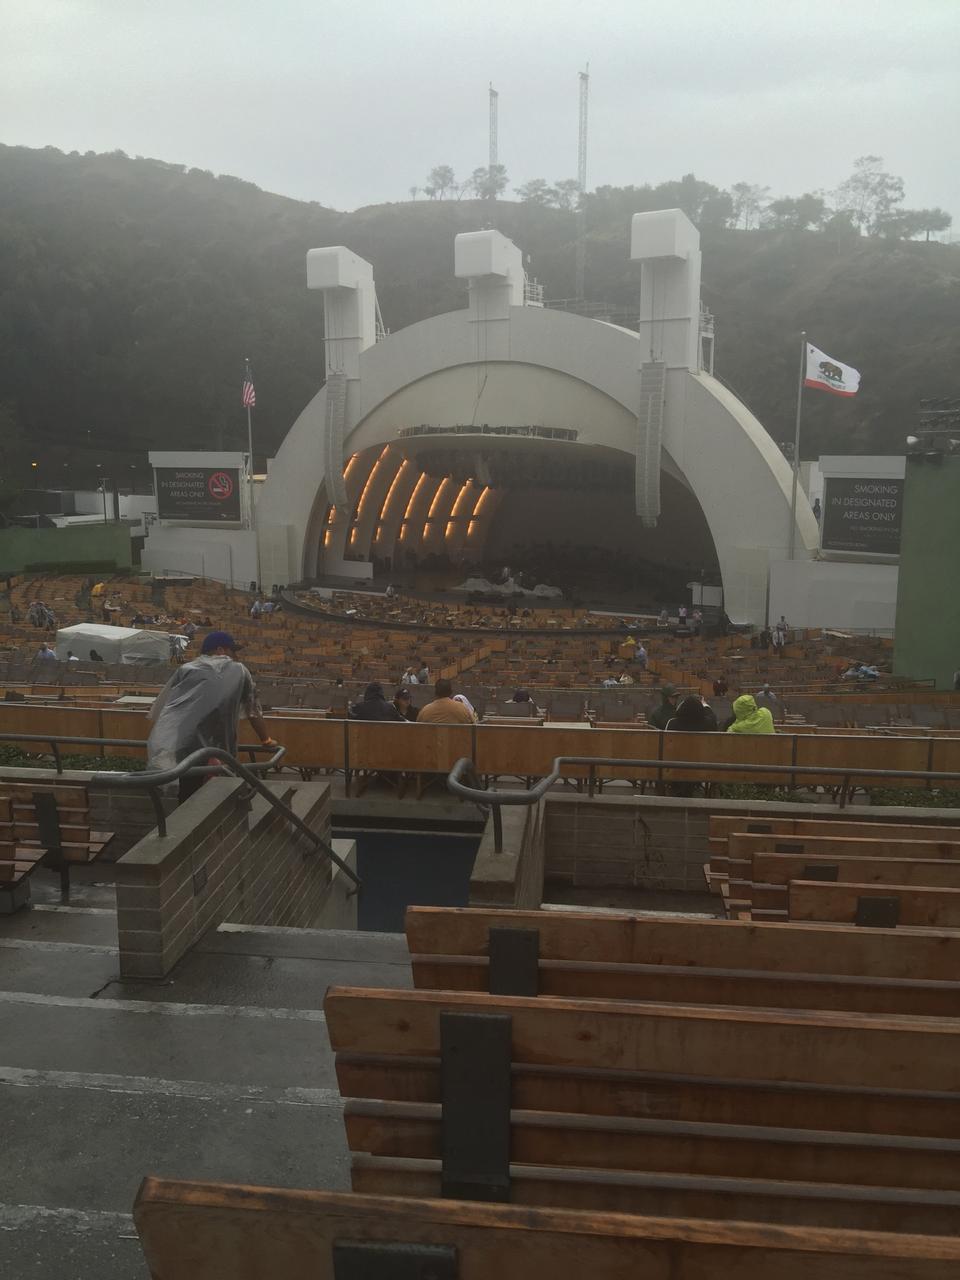 Hollywood Bowl Section F1 - RateYourSeats.com